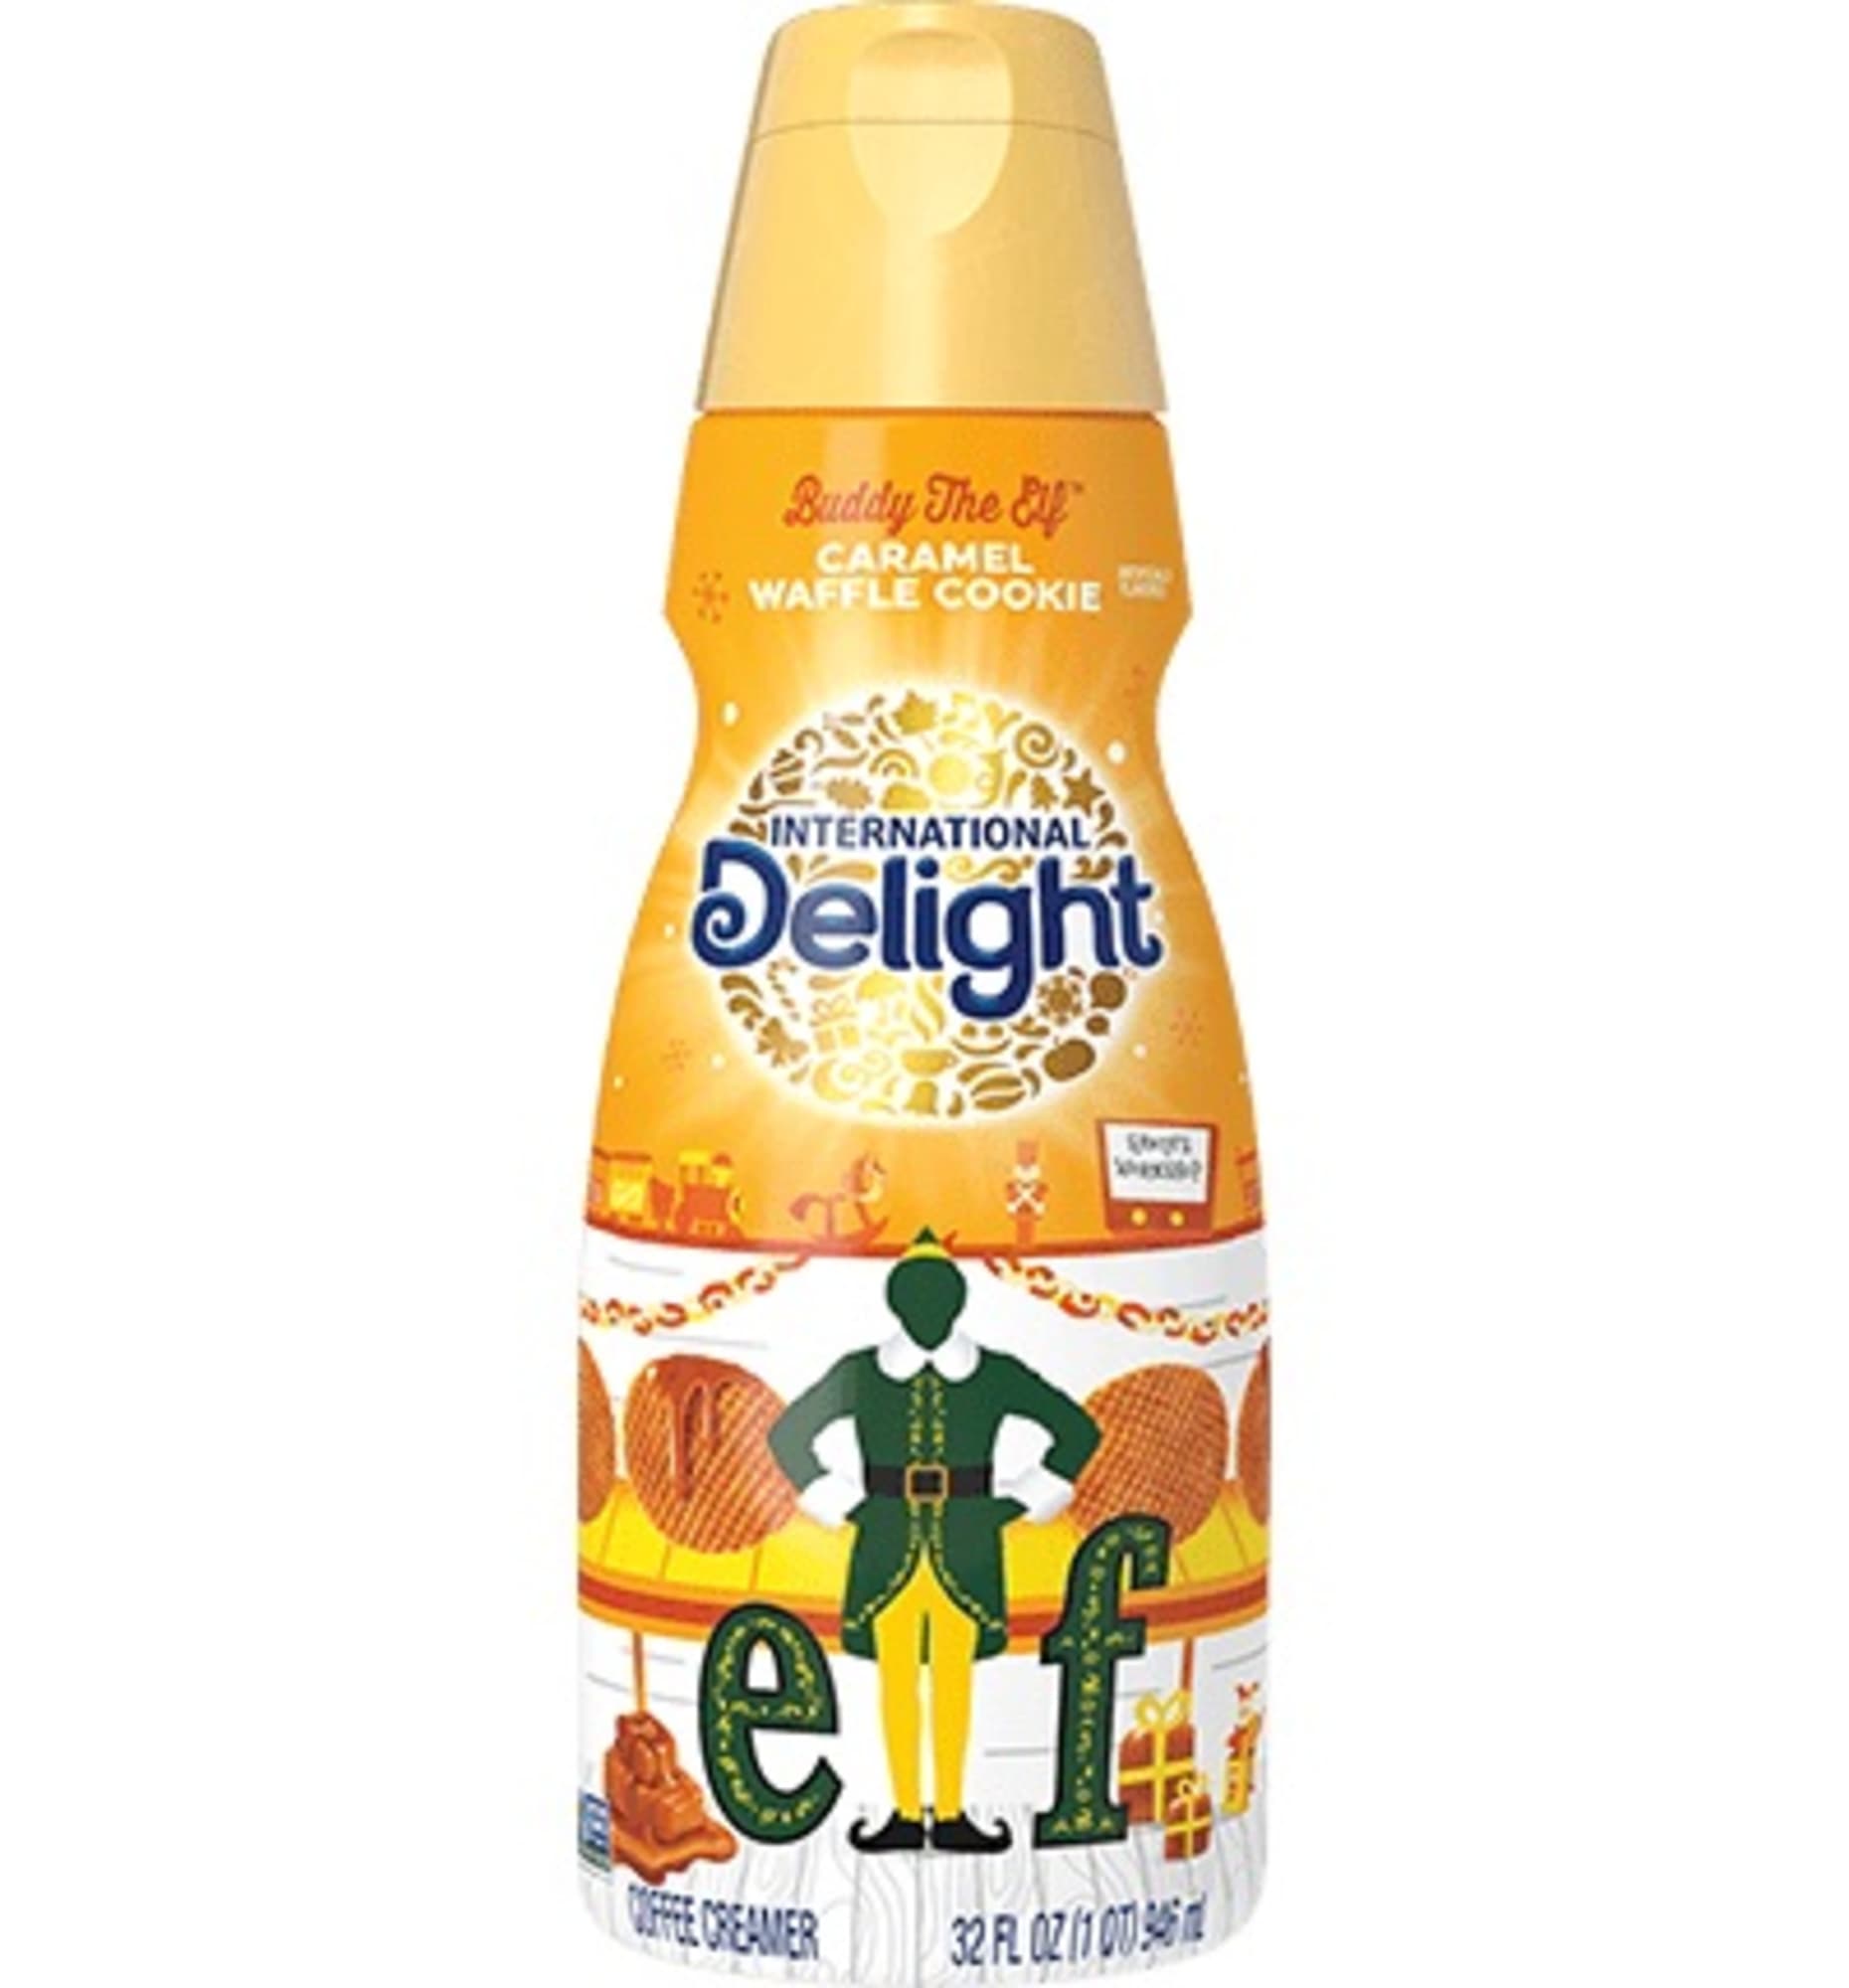 International Delight Frosted Sugar Cookie Coffee Creamer - 32 Fl